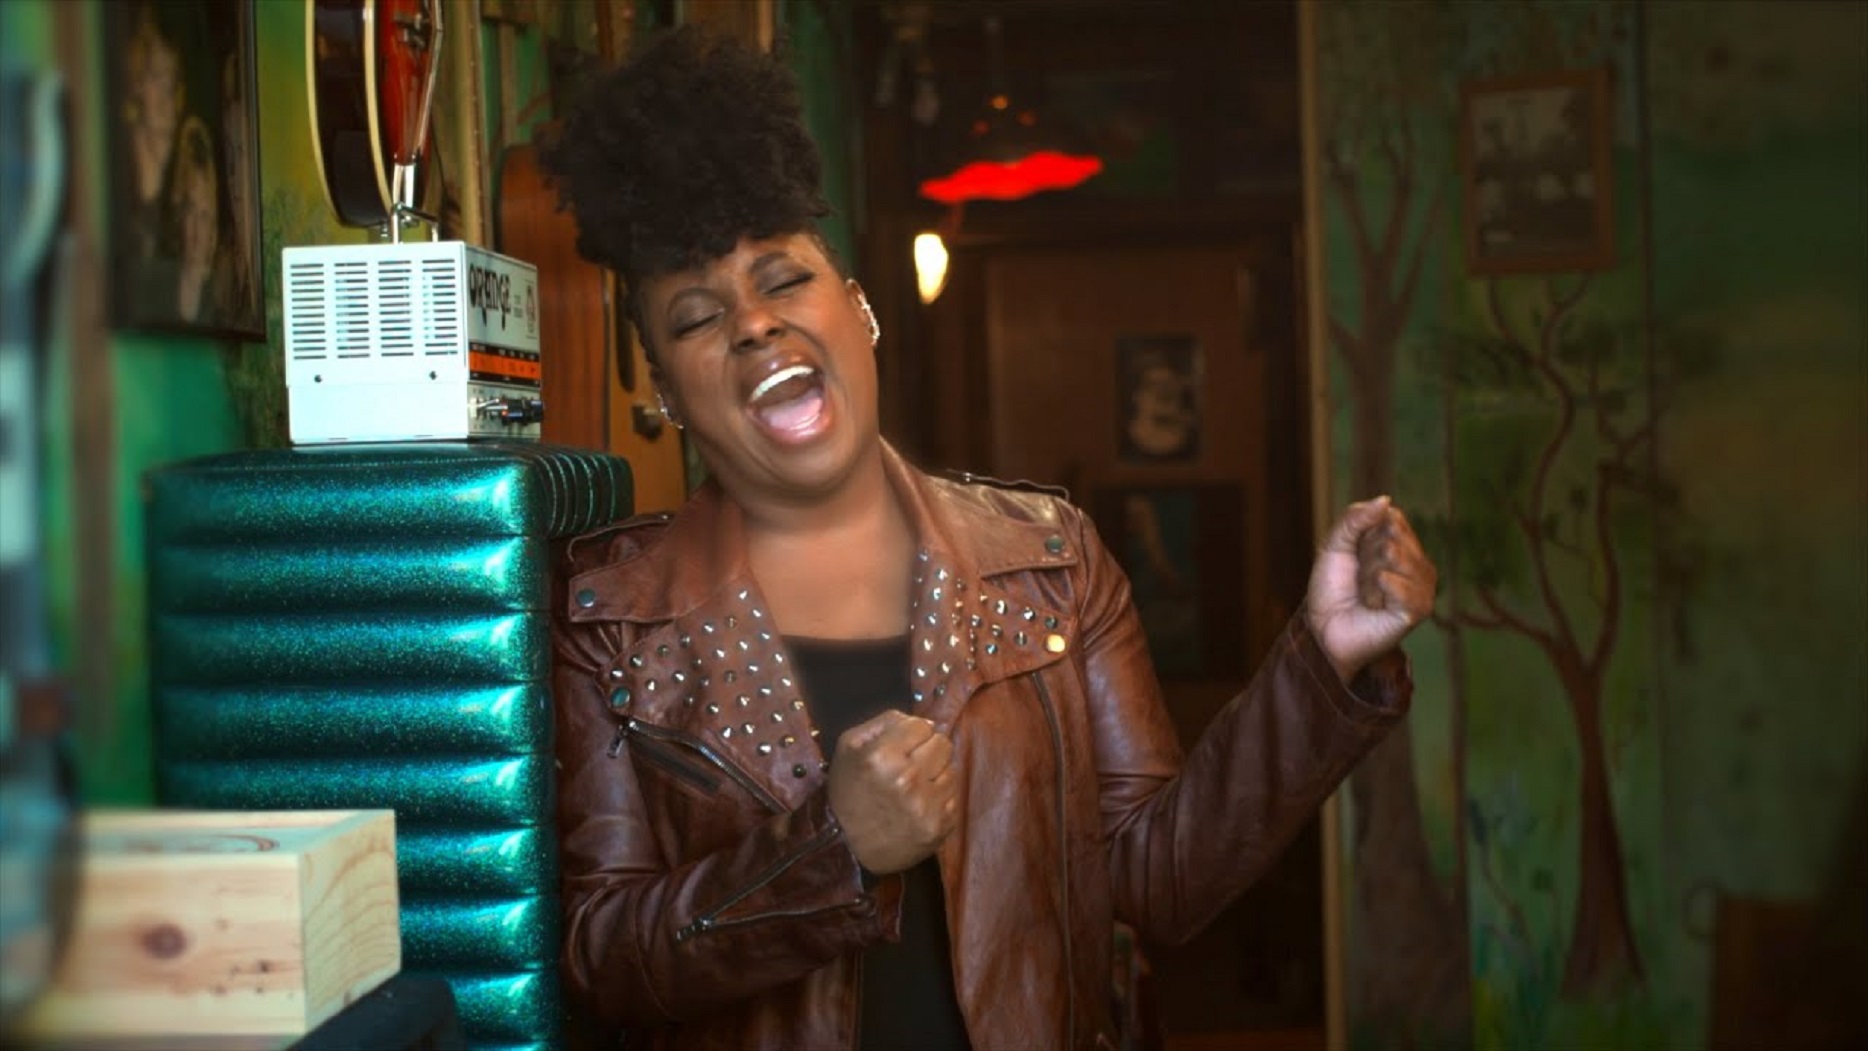 She’s Here! Watch The Extremely Talented Ledisi’s New Music Video ‘Anything for You’